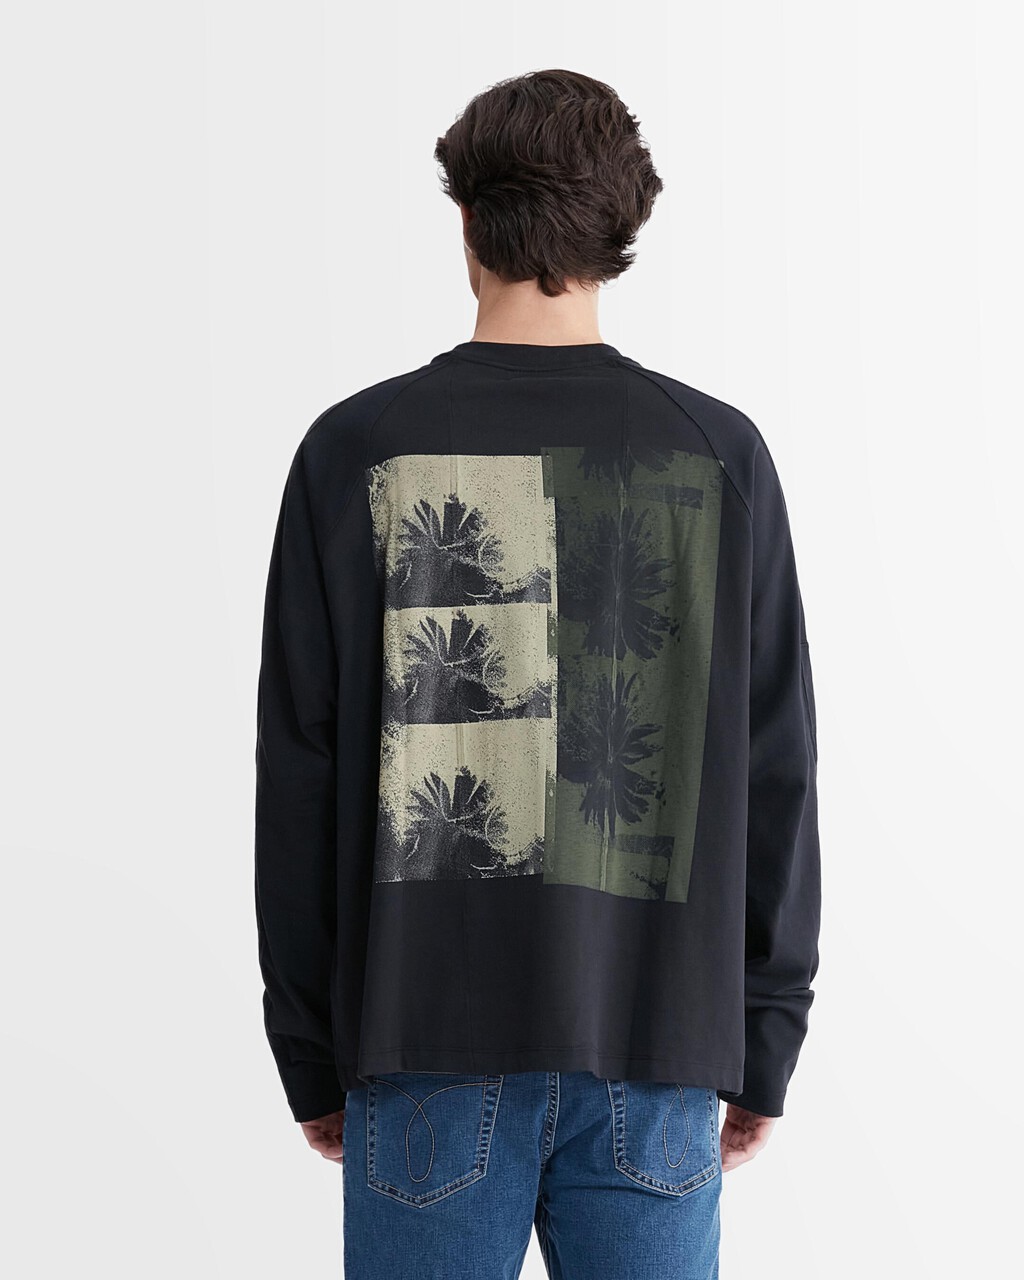 Standards Floral Study Graphic Long Sleeve Tee, Black Beauty, hi-res